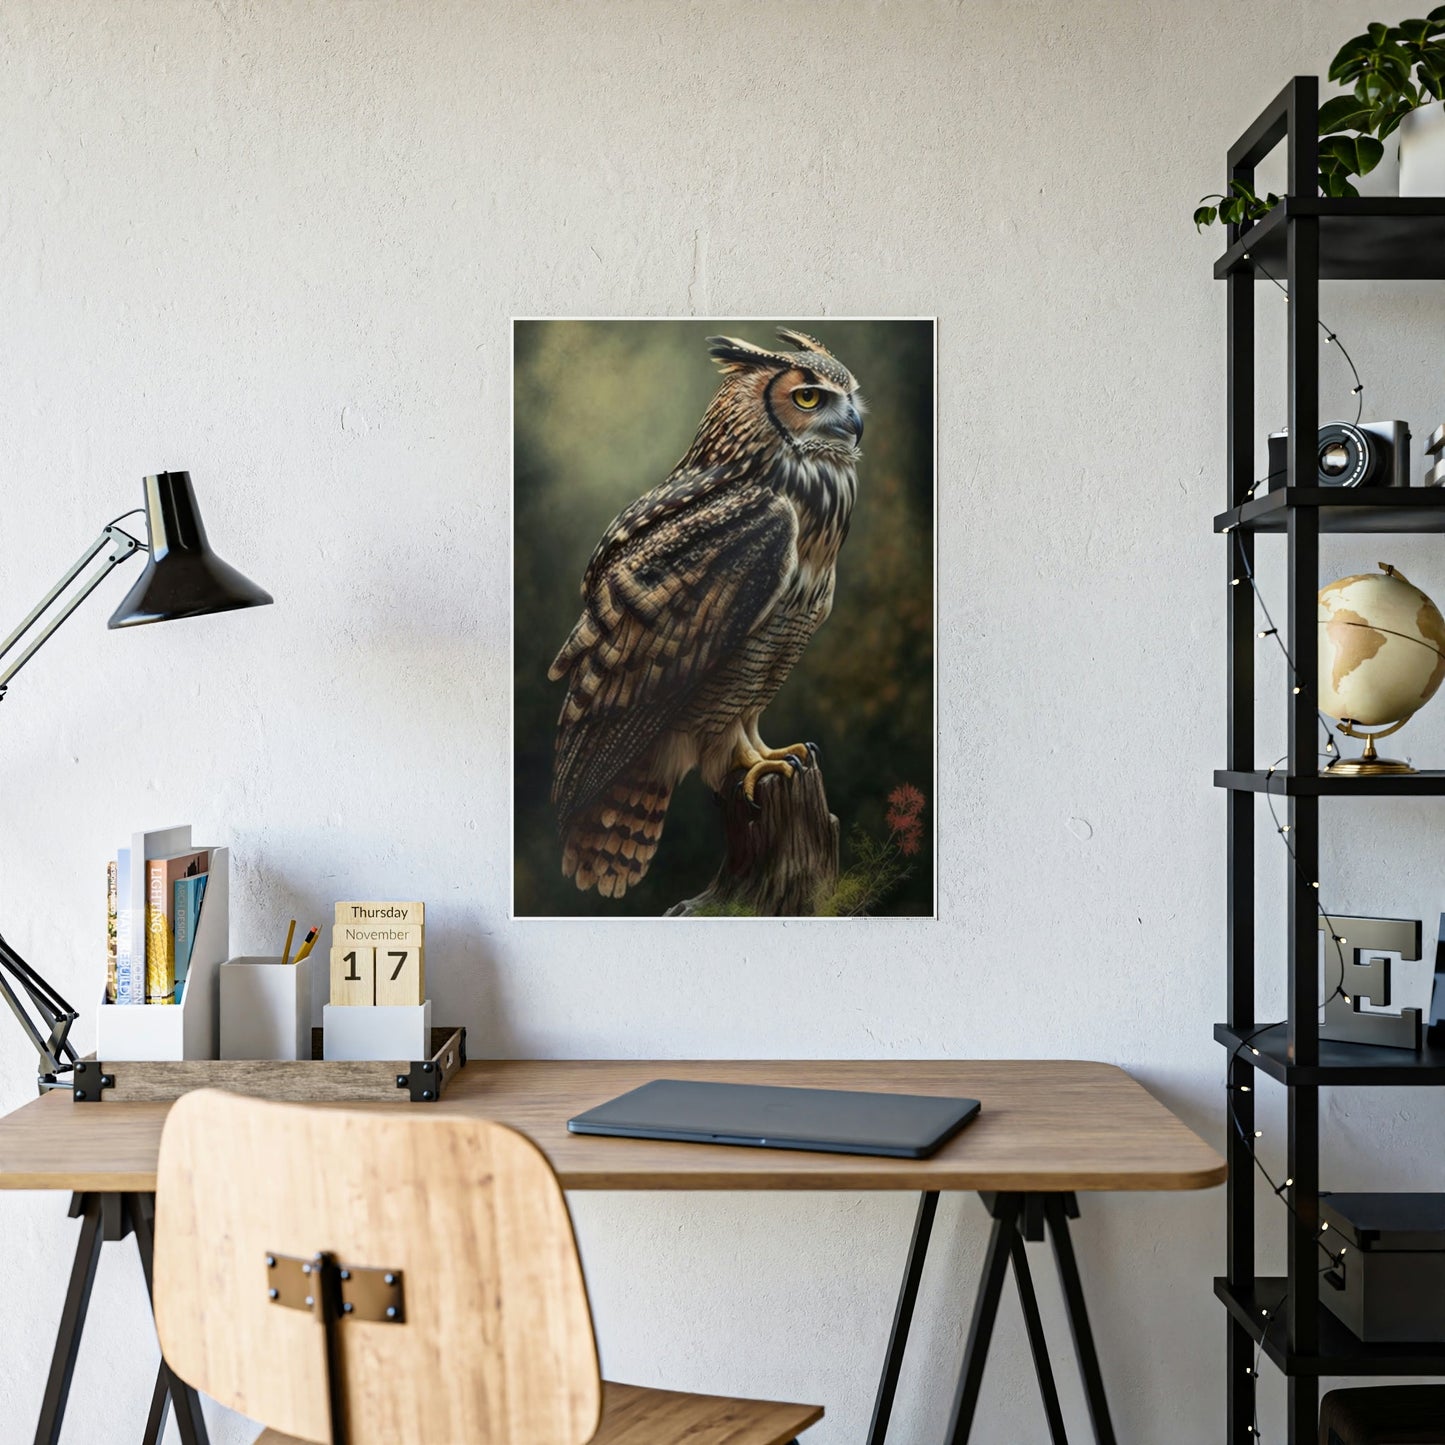 Eyes of the Forest: A Painting of an Owl in its Habitat